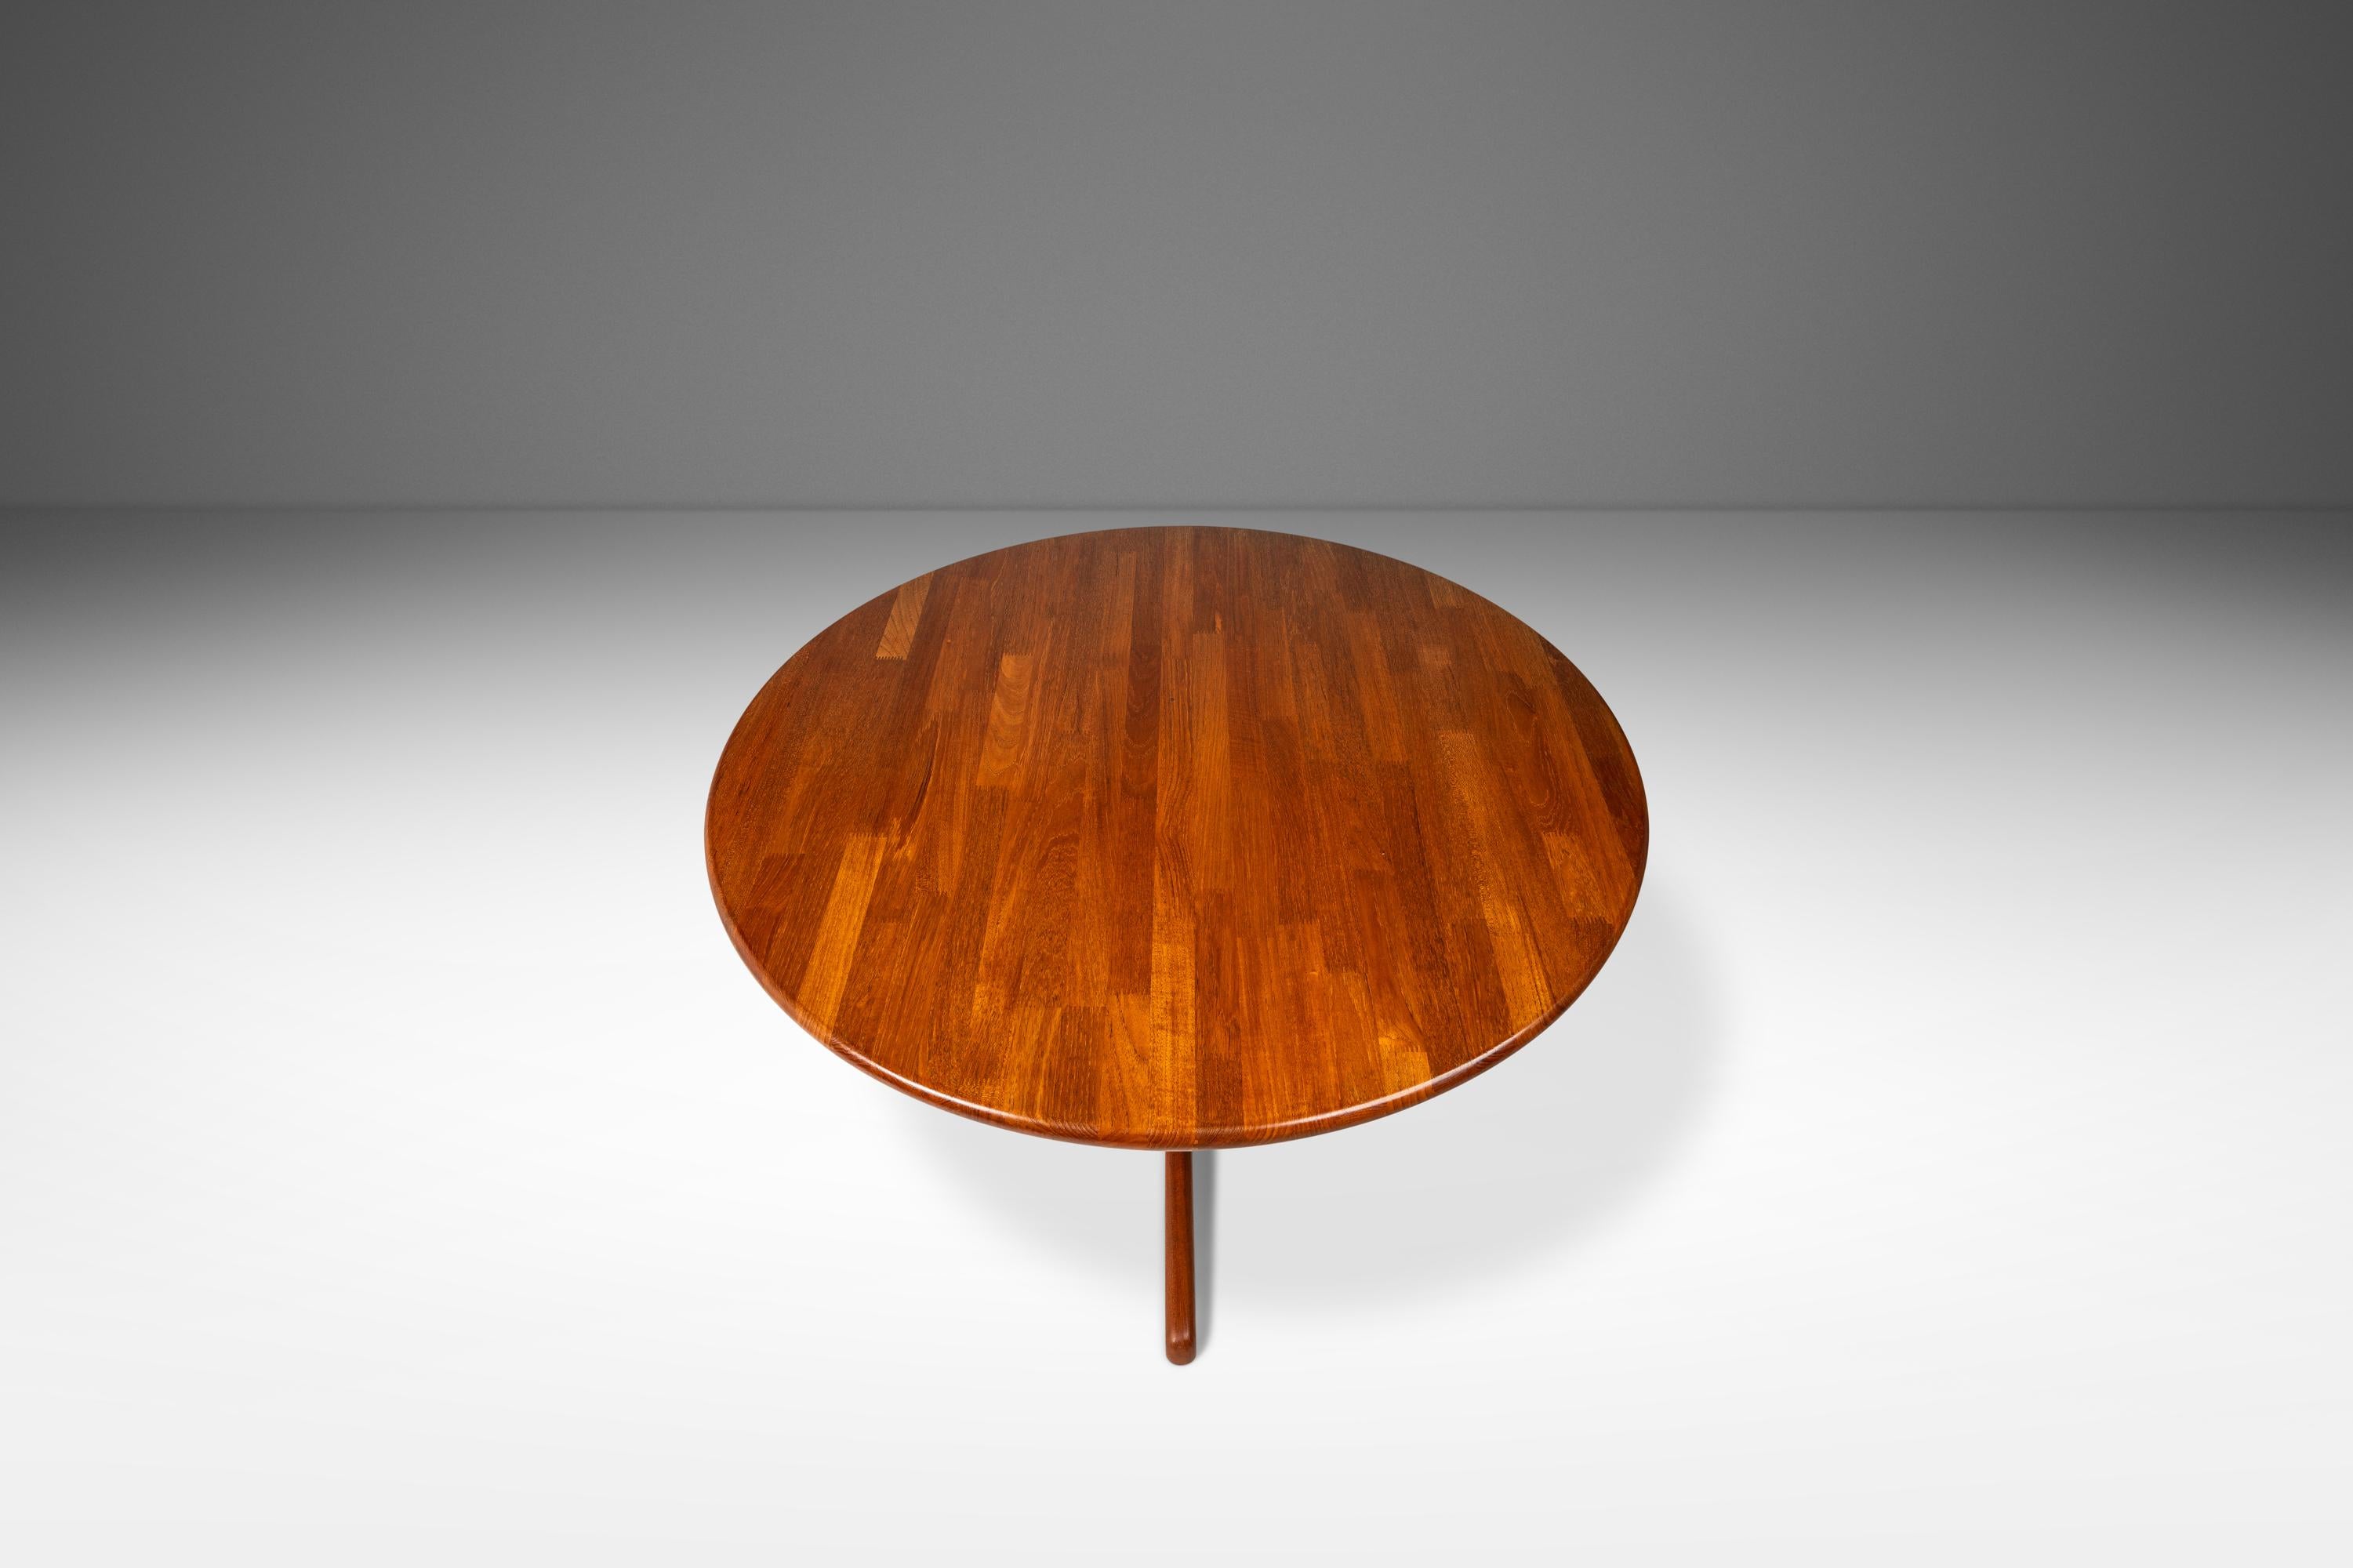 Introducing a stunning Danish-made dining table designed by Tarm Stole for OG Møbelfabrik. In remarkable 100% original, vintage condition this petite table is constructed from solid slabs of Burmese teak with exceptional woodgrains throughout.